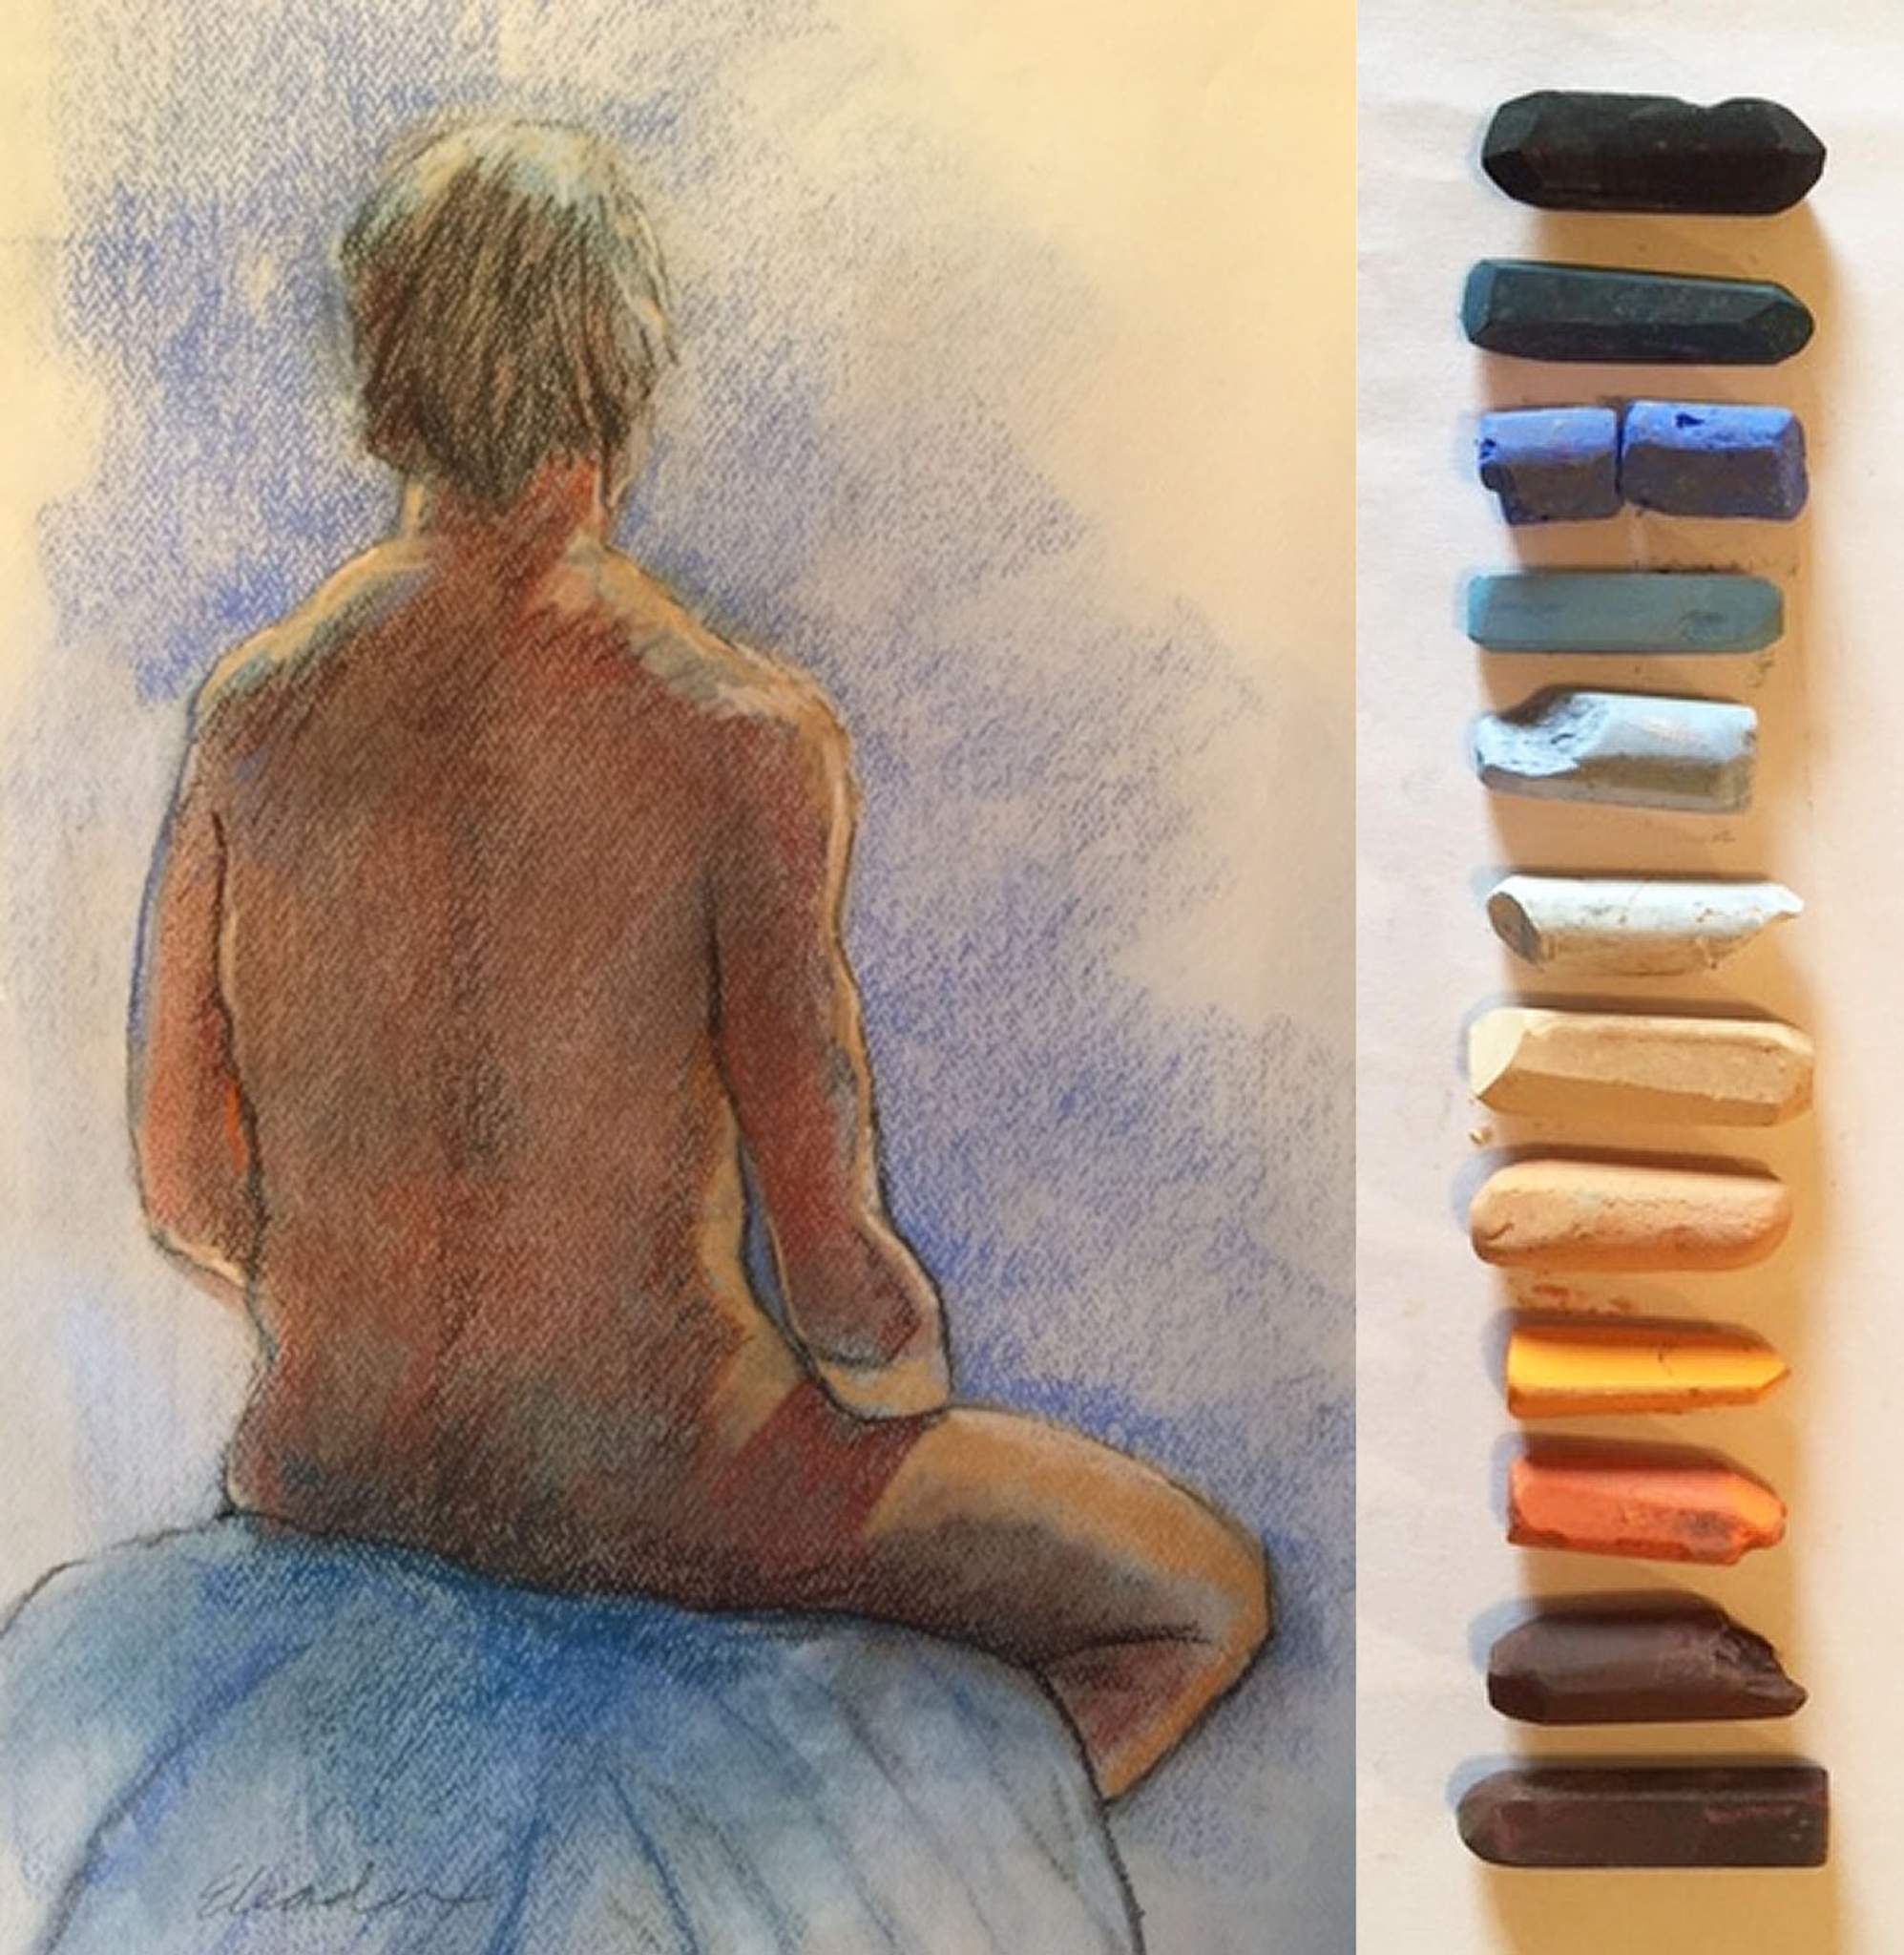 LIFE DRAWING – AN EXERCISE IN CALM FOCUS